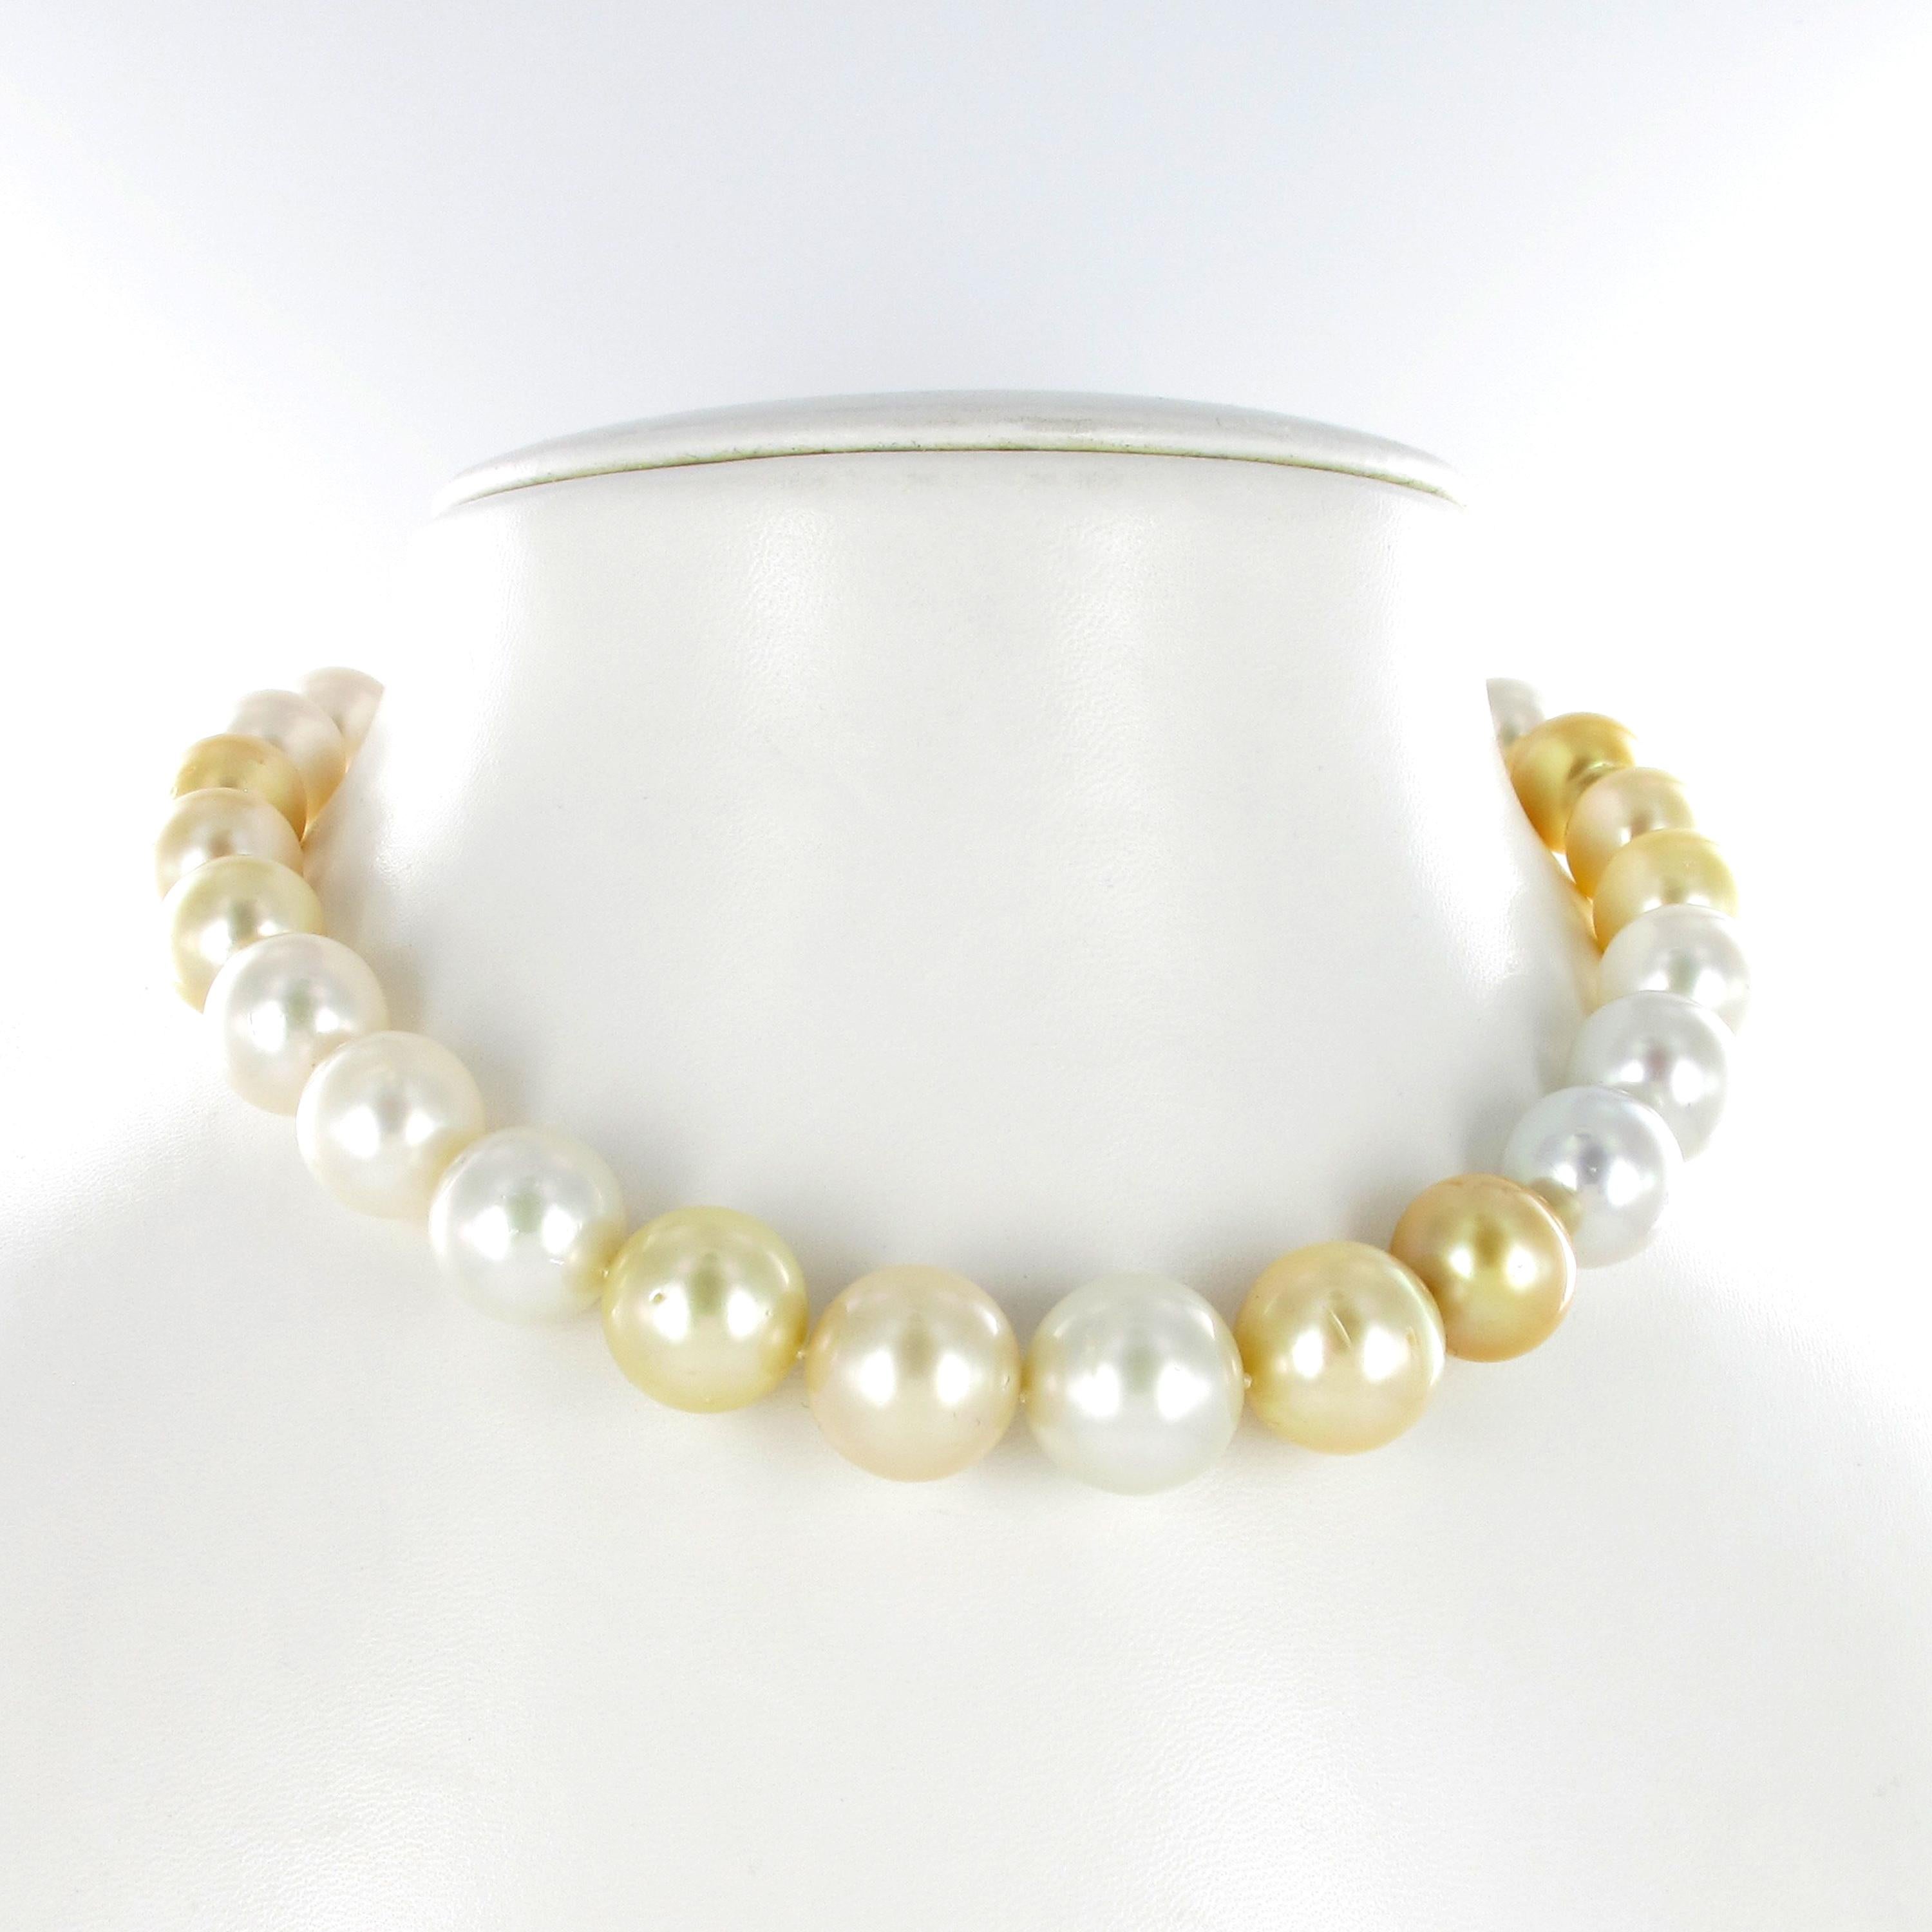 This strand consists of 29 white and golden South Sea cultured pearls from 12.8 mm to 16.5 mm. The bayonet/tube clasp in 18 karat yellow gold is elegantly hidden in the smallest cultured pearl. 
The pearls are of near round shapes, with a slightly